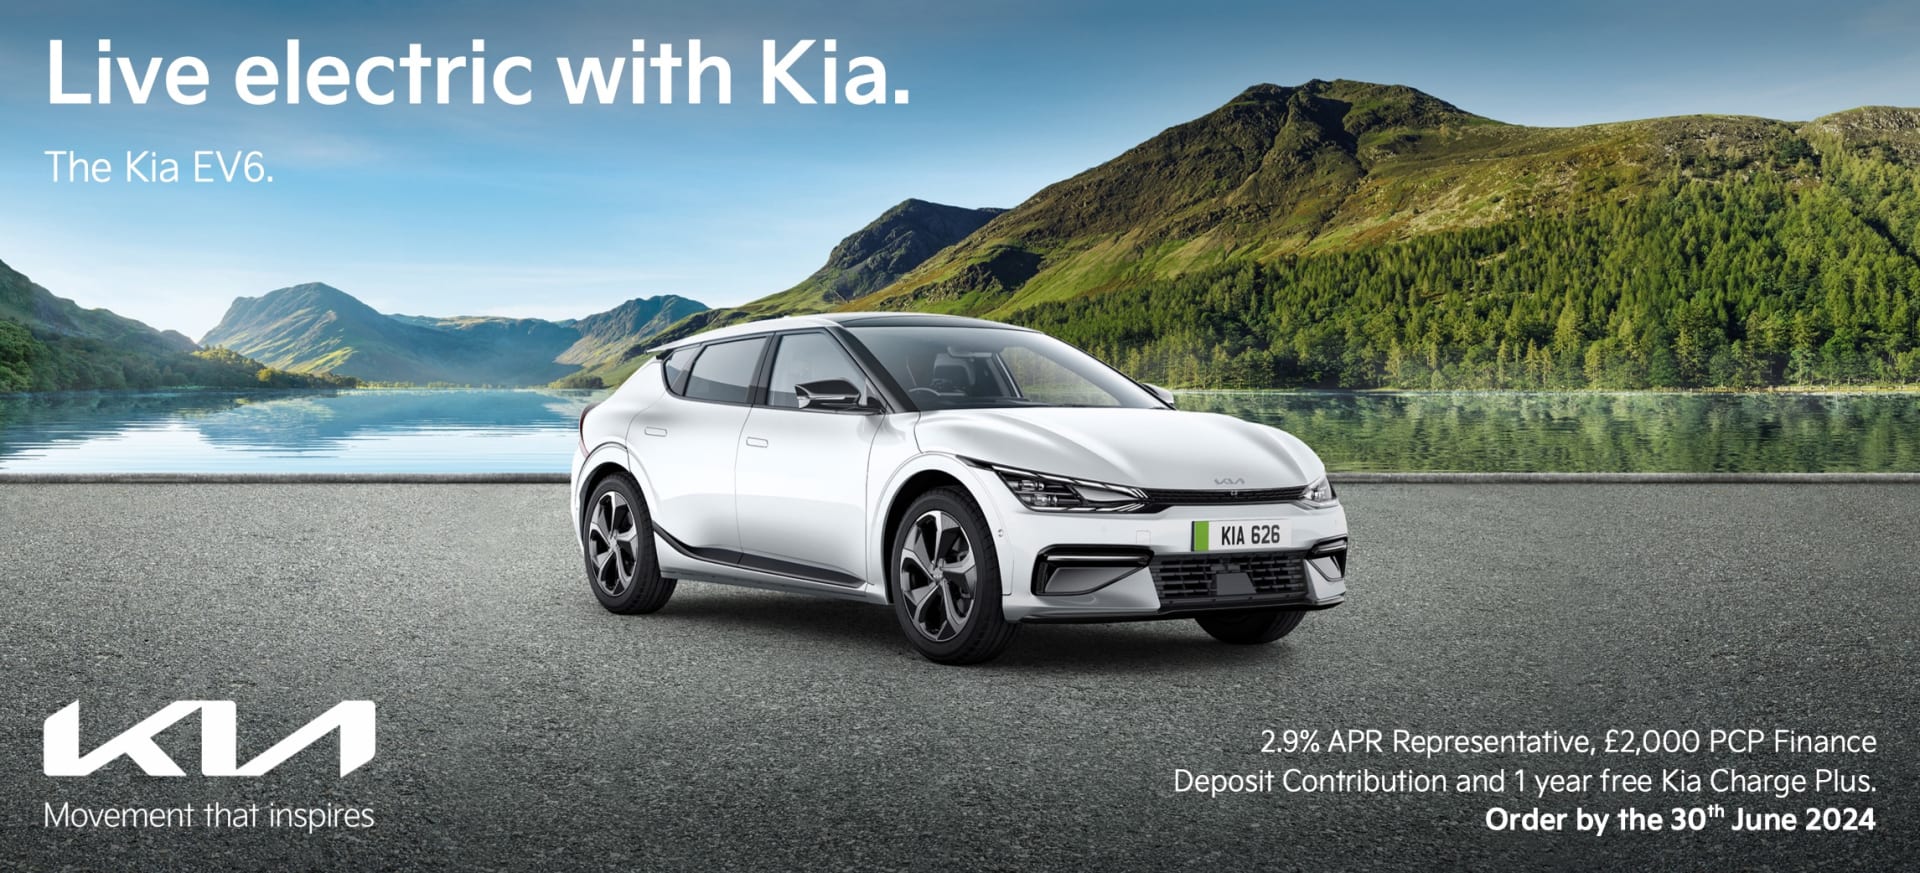 Live Electric with Kia. The EV6 at Park's Motor Group